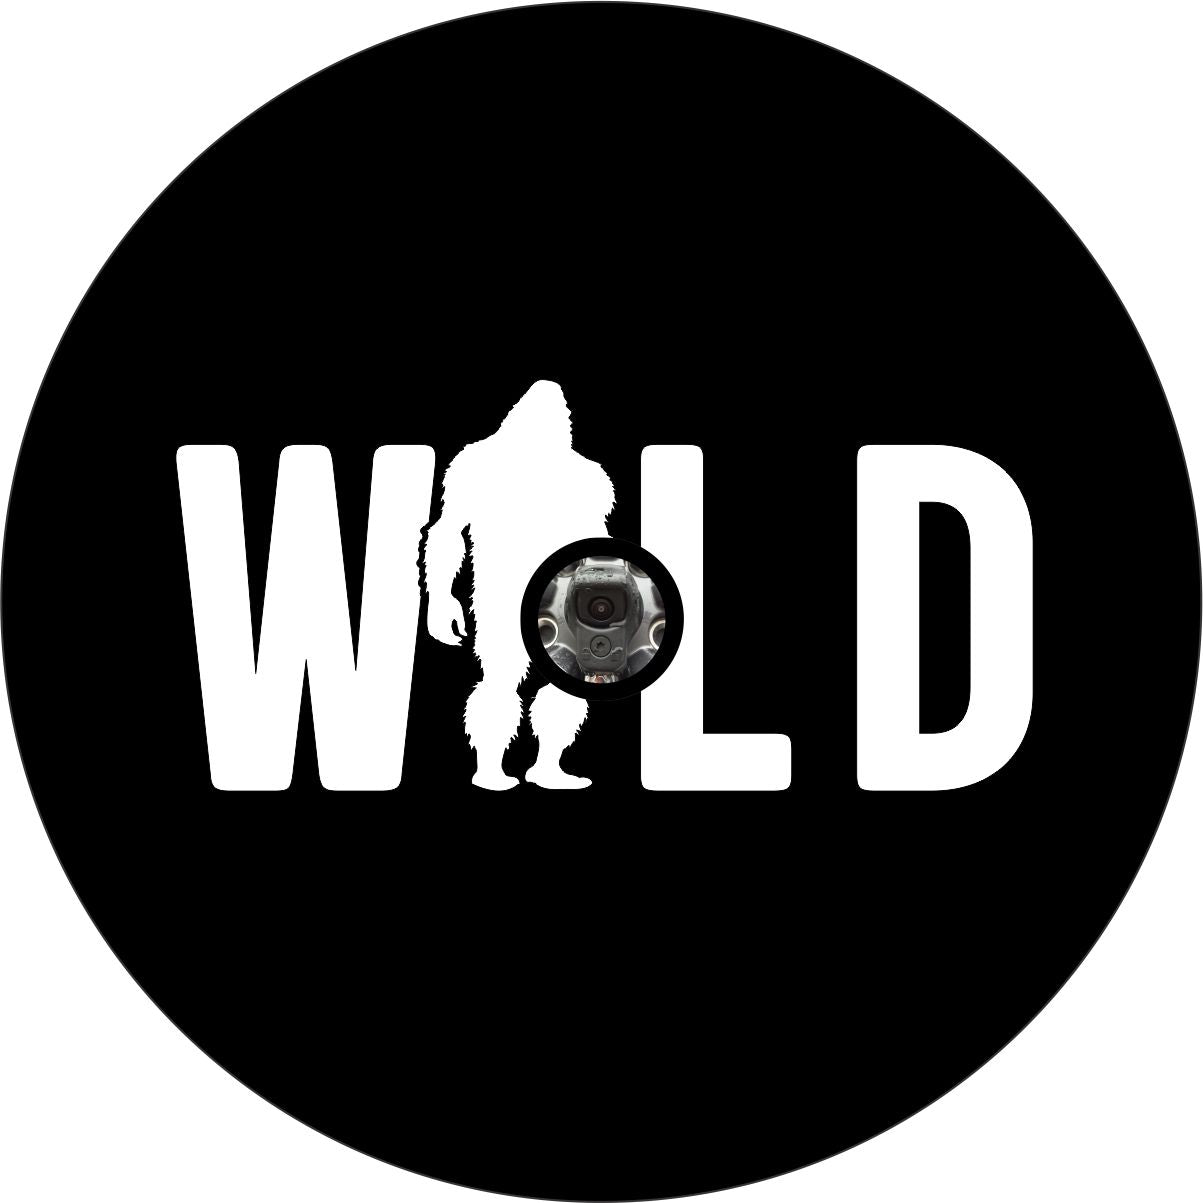 Black vinyl spare tire cover with white letters that say WILD, but with a silhouette of sasquatch replacing the I & a hole for a back up camera design in the spare wheel.